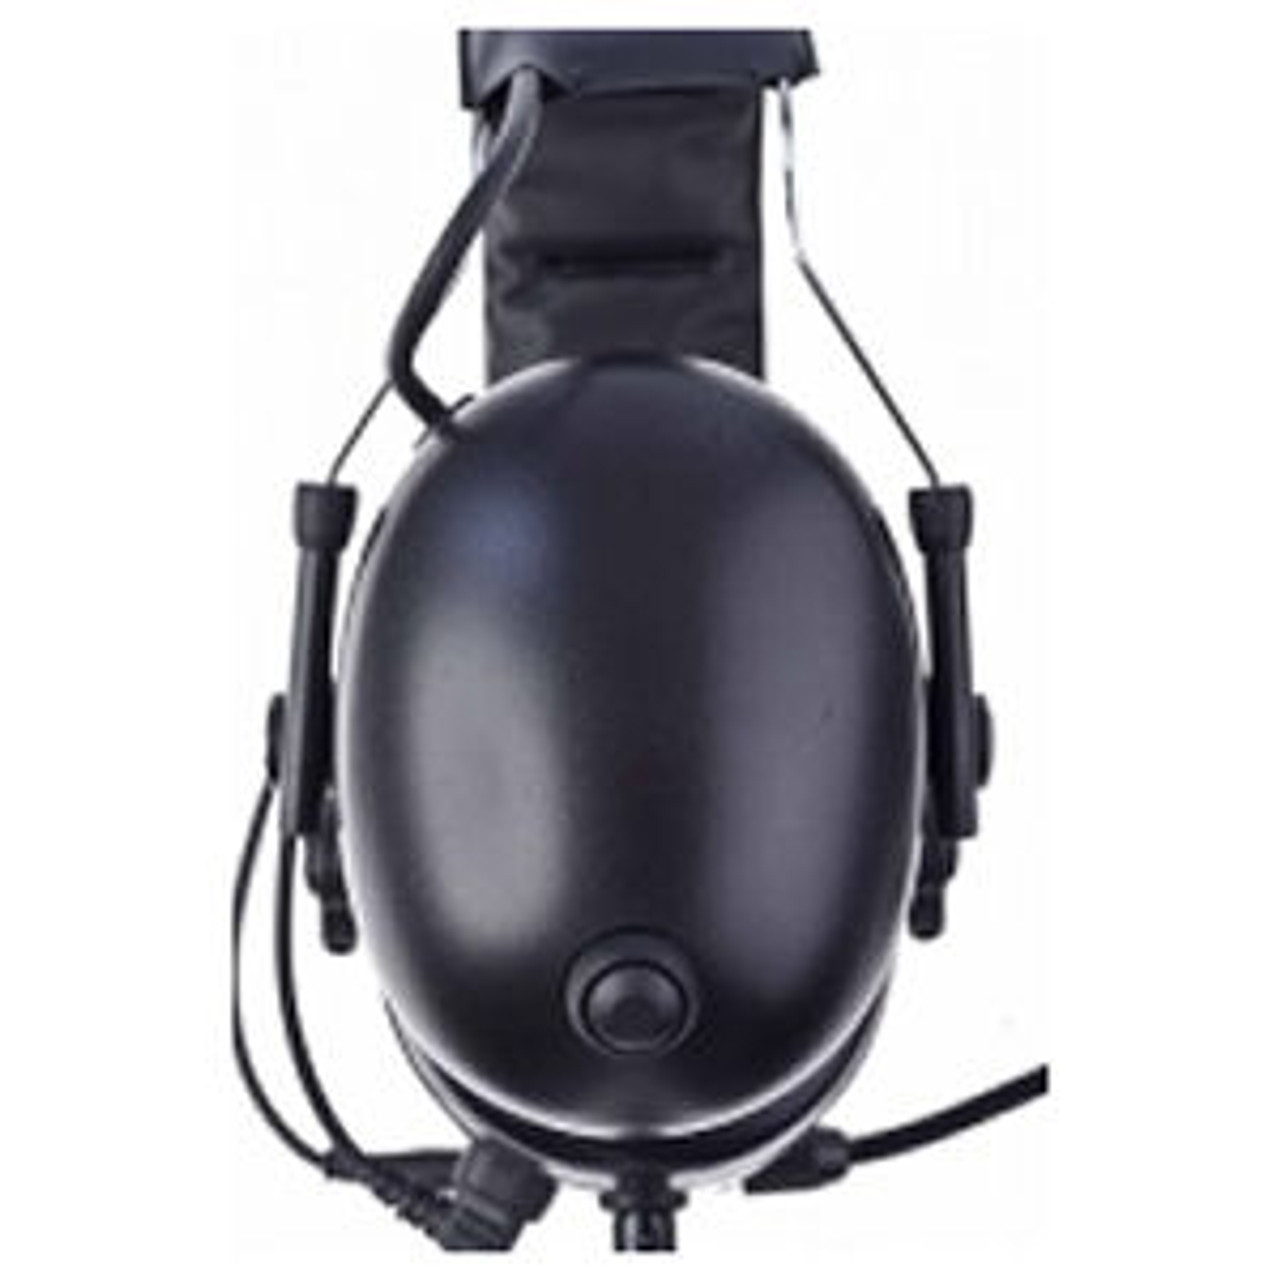 Kenwood TH-208 Over The Head Double Muff Headset